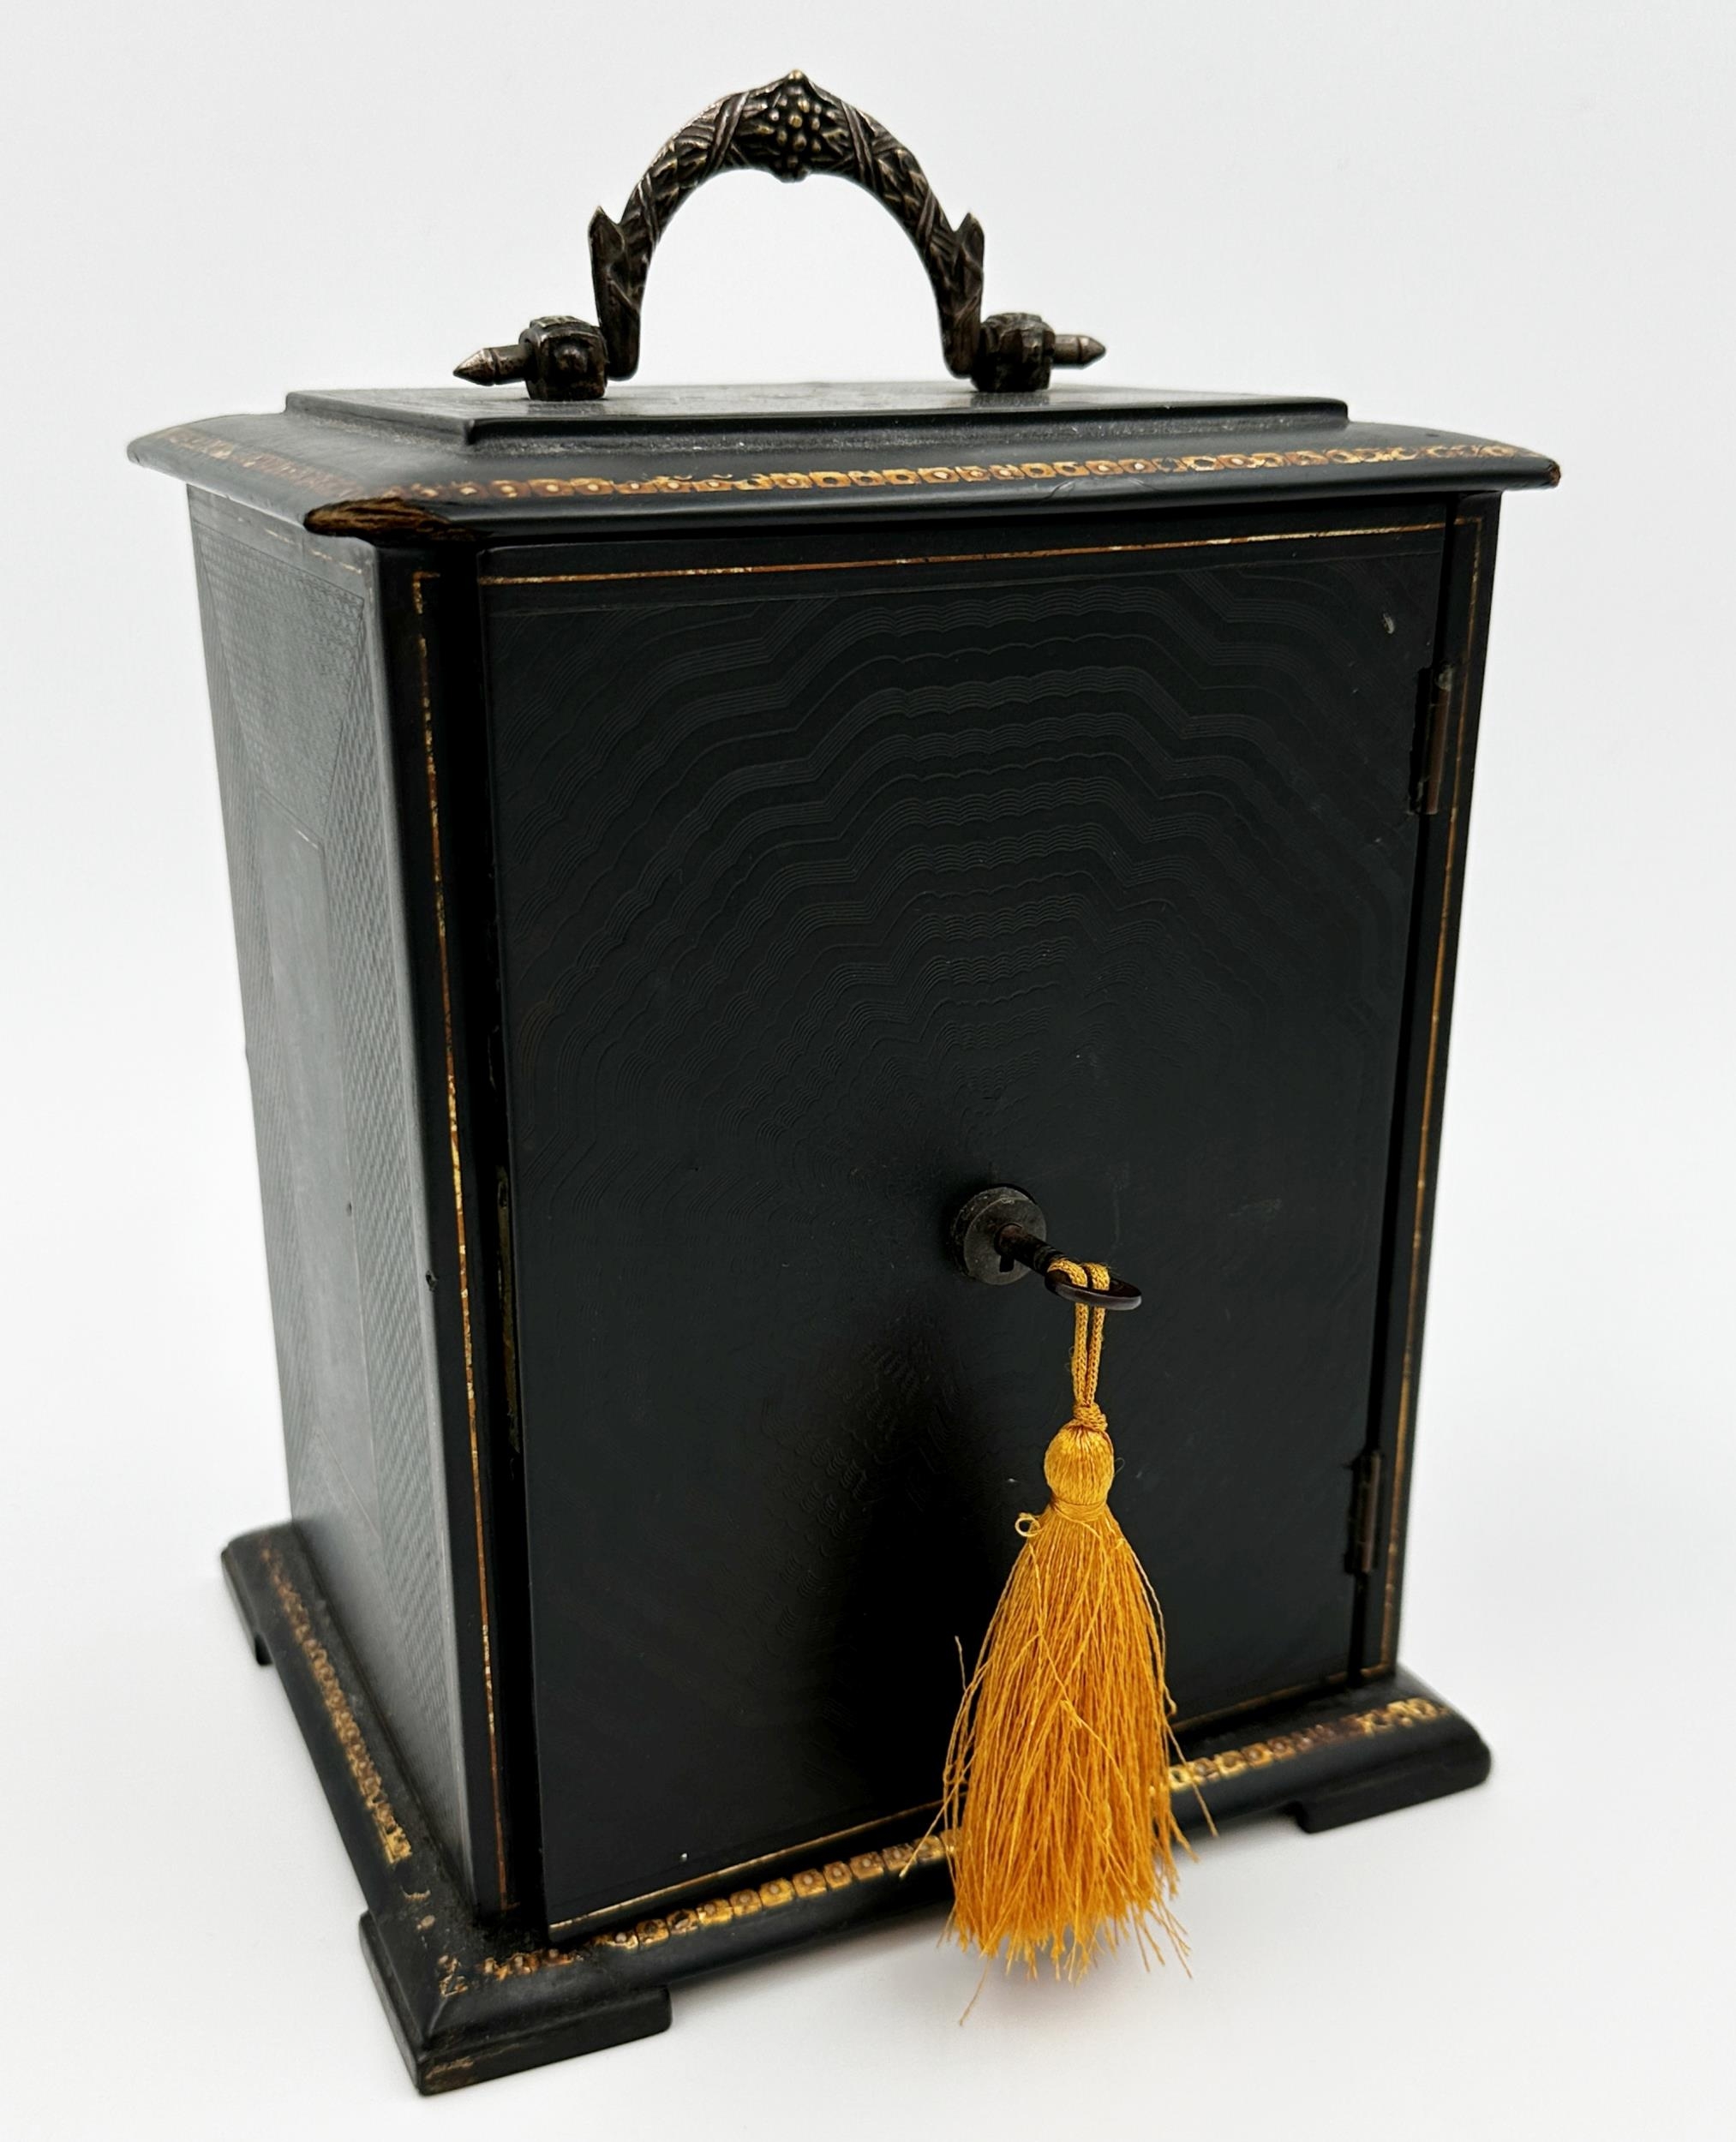 Good 19th century lacquered collectors cabinet, with sunburst textured door and gilt highlight,